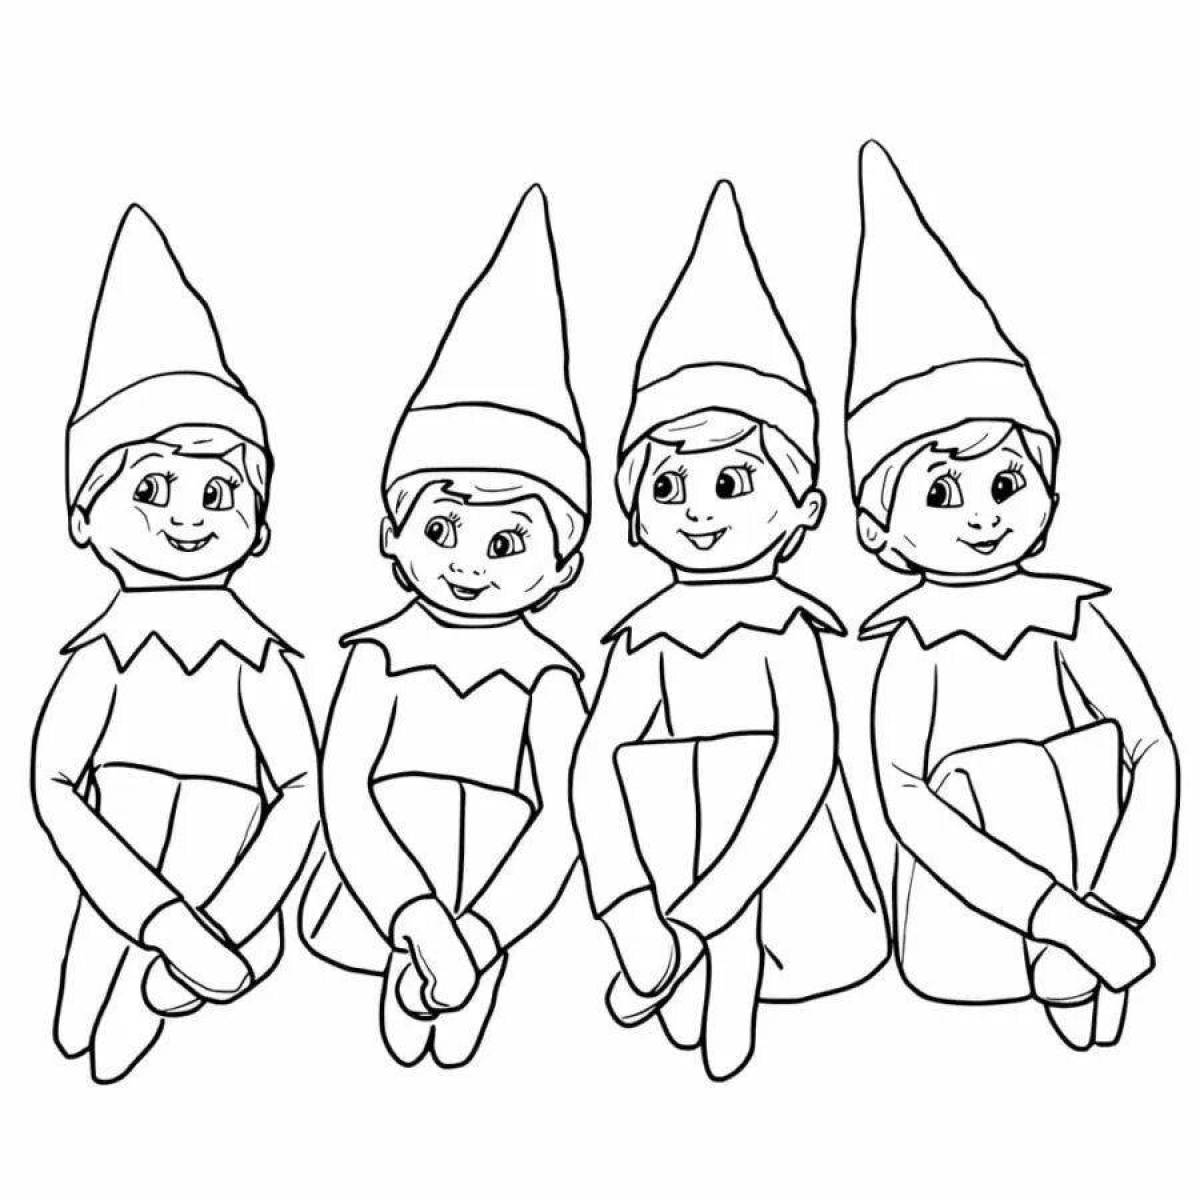 Coloring book elf for kids